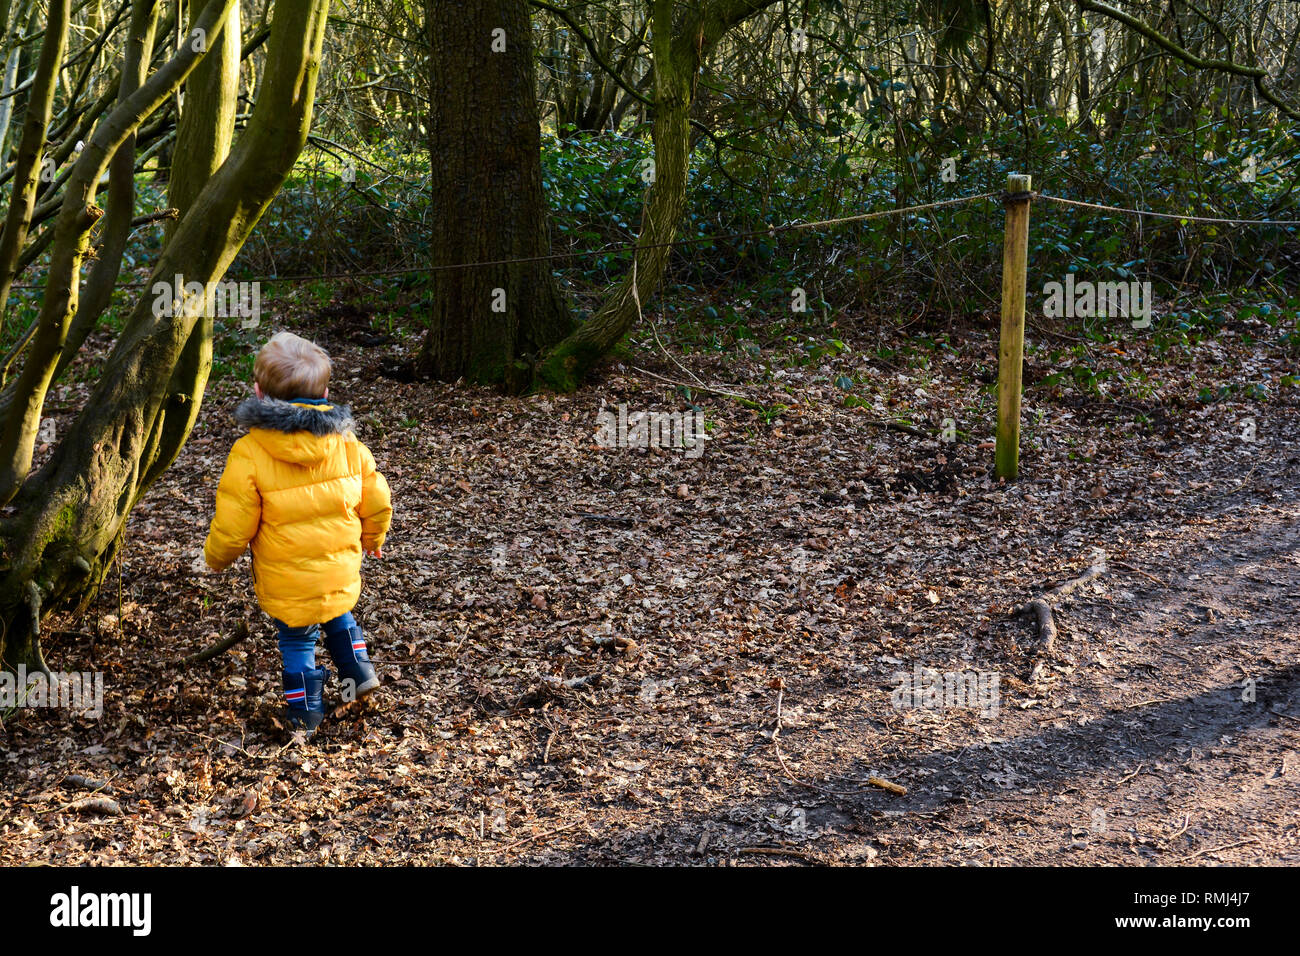 Young boy exploring outdoors and learning to climb trees Stock Photo